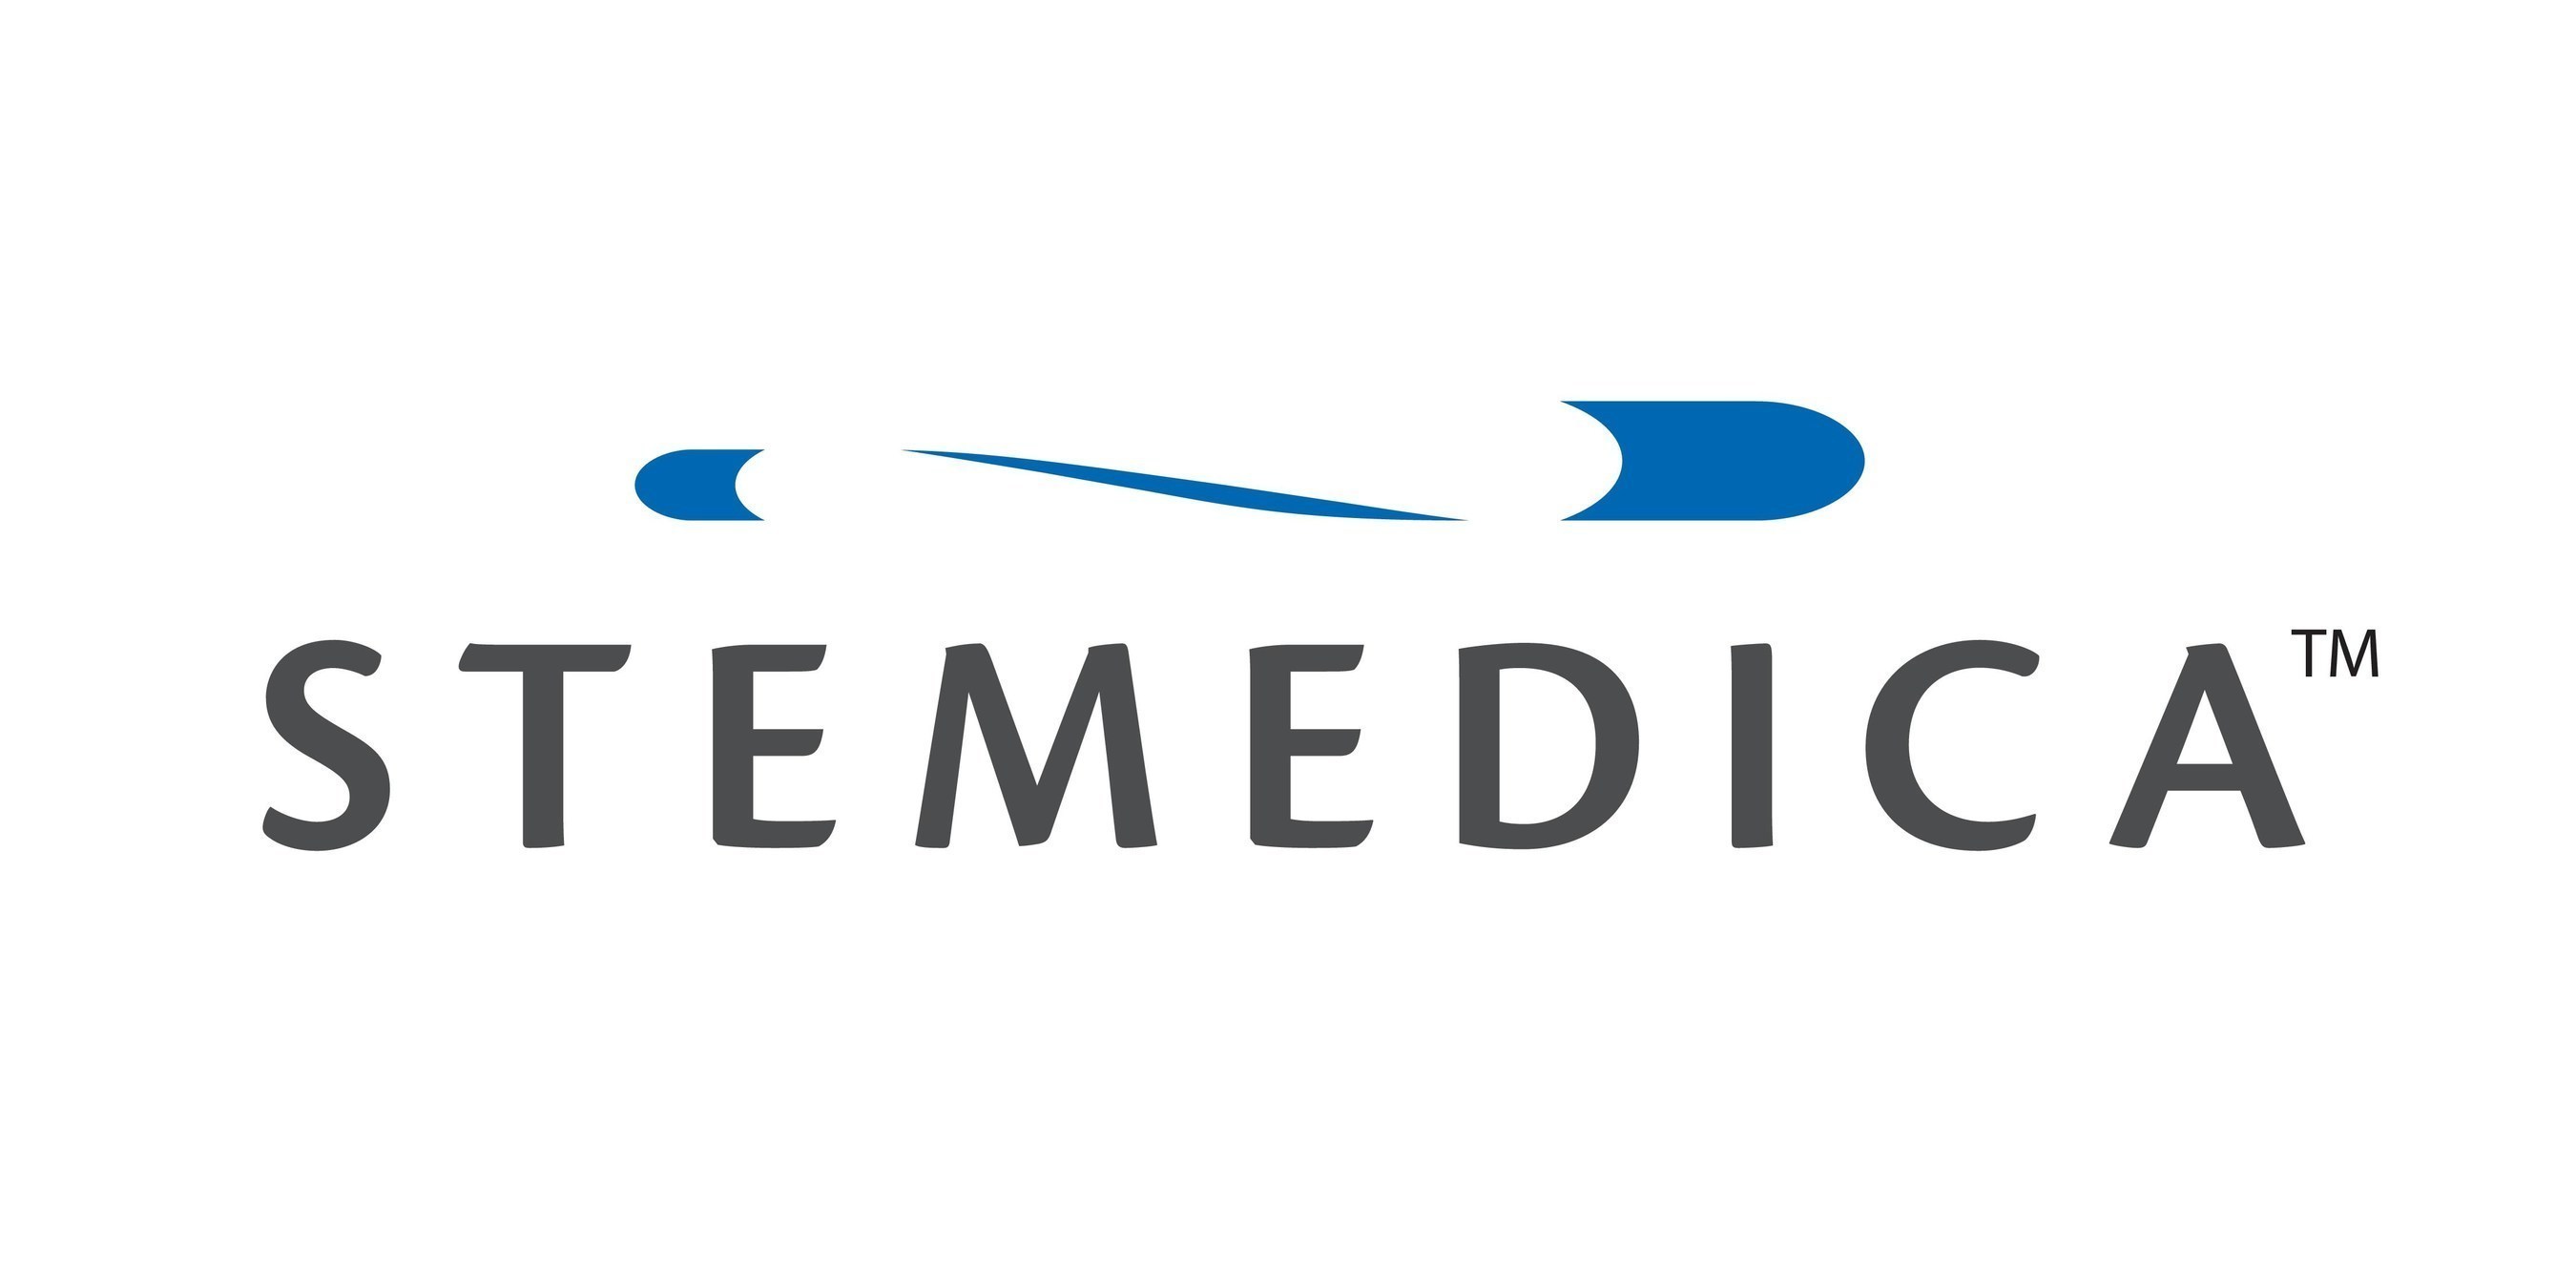 Stemedica Cell Technologies, Inc. is a specialty biopharmaceutical company which manufactures best-in-class allogeneic adult stem cells and stem cell factors. The company is a government licensed manufacturer of cGMP, clinical-grade stem cells currently used in US-based clinical trials for acute myocardial infarction, chronic heart failure, cutaneous photoaging and ischemic stroke. Stemedica's products are also used on a worldwide basis …